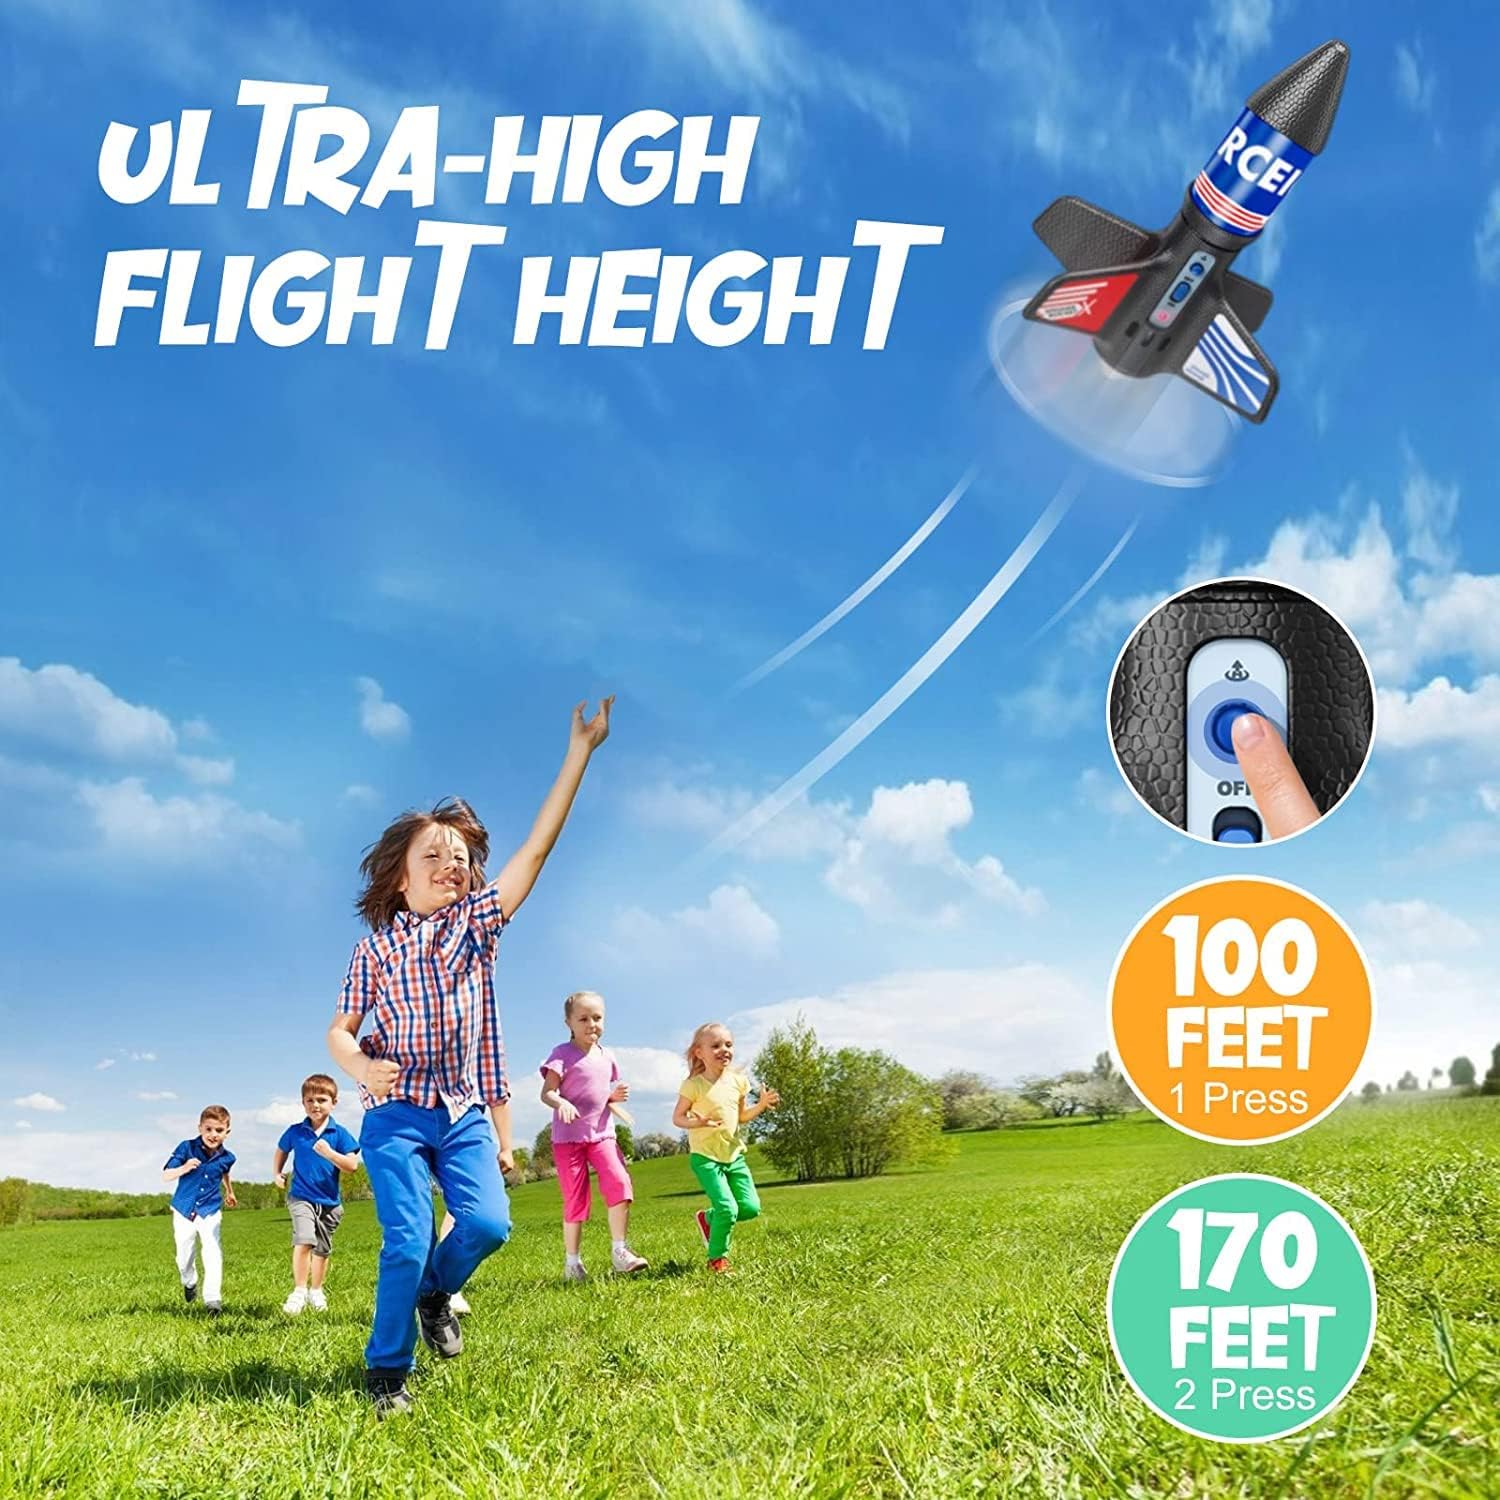 Rocket Launcher for Kids, 170 Feet of Flight Altitude, Model Rocket Kits with Launch Set, Ultra-high Flying Rocket, Rocket Toy, Kids Outdoor Toys, Toys for Ages 8-13 Boy Birthday Gift Ideas